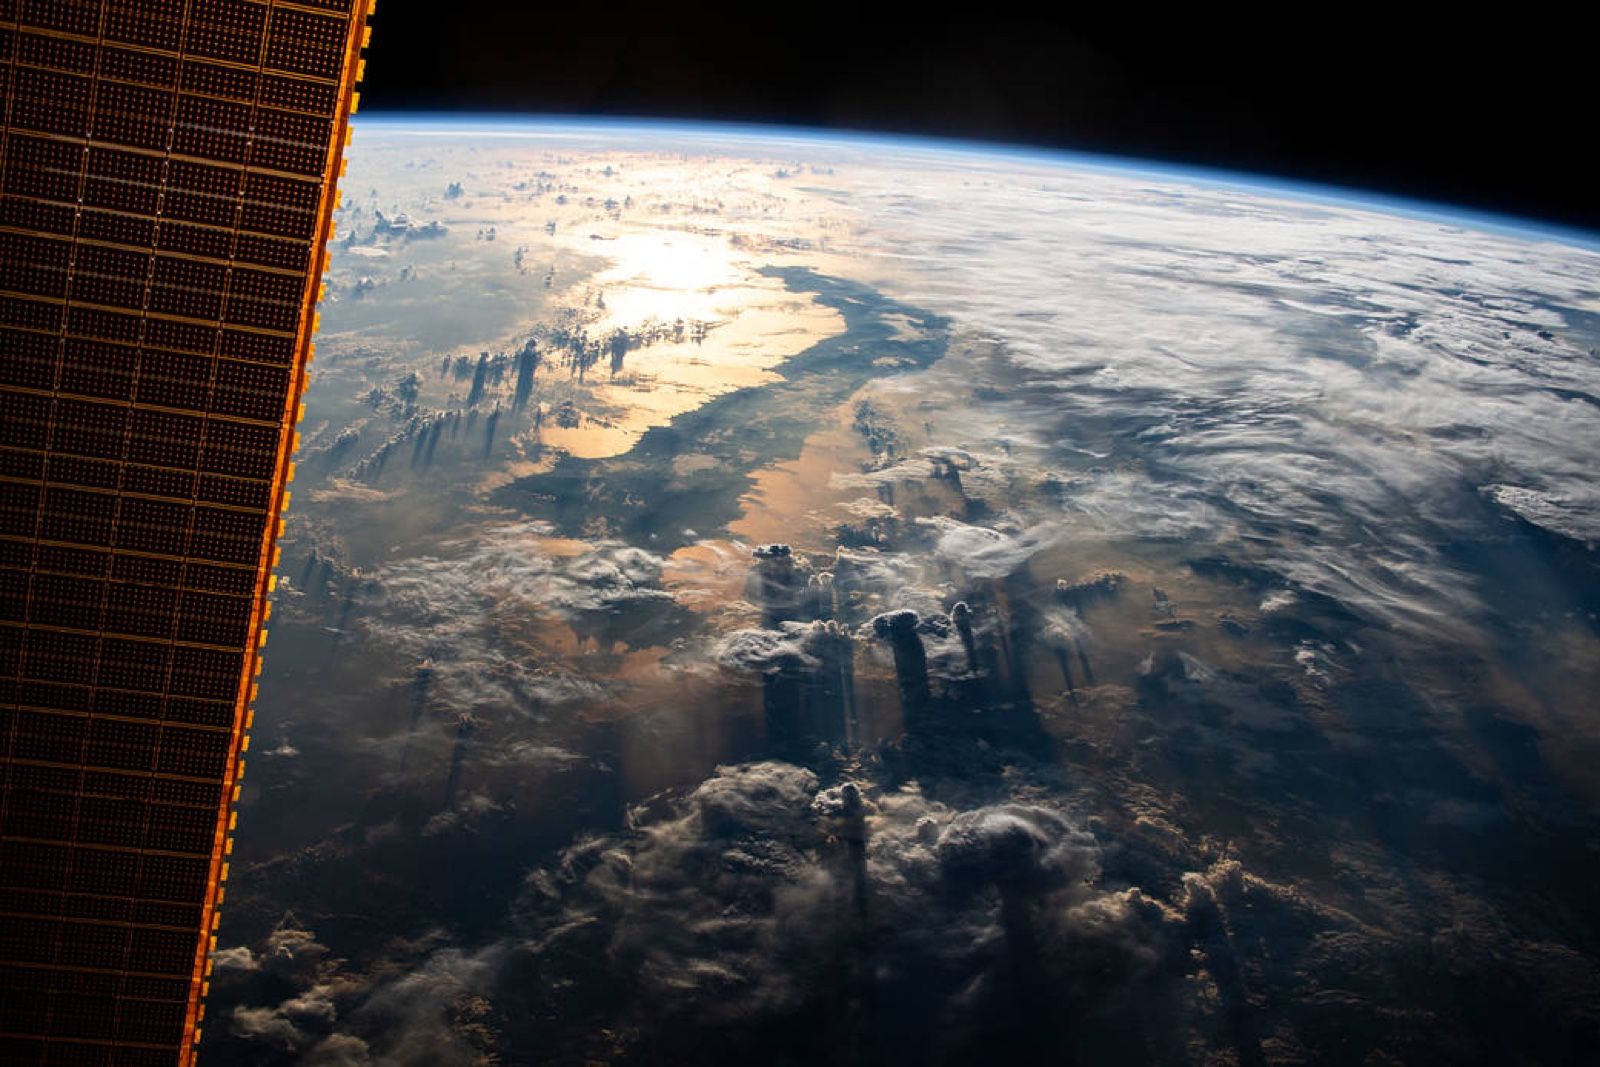 ISS image 11